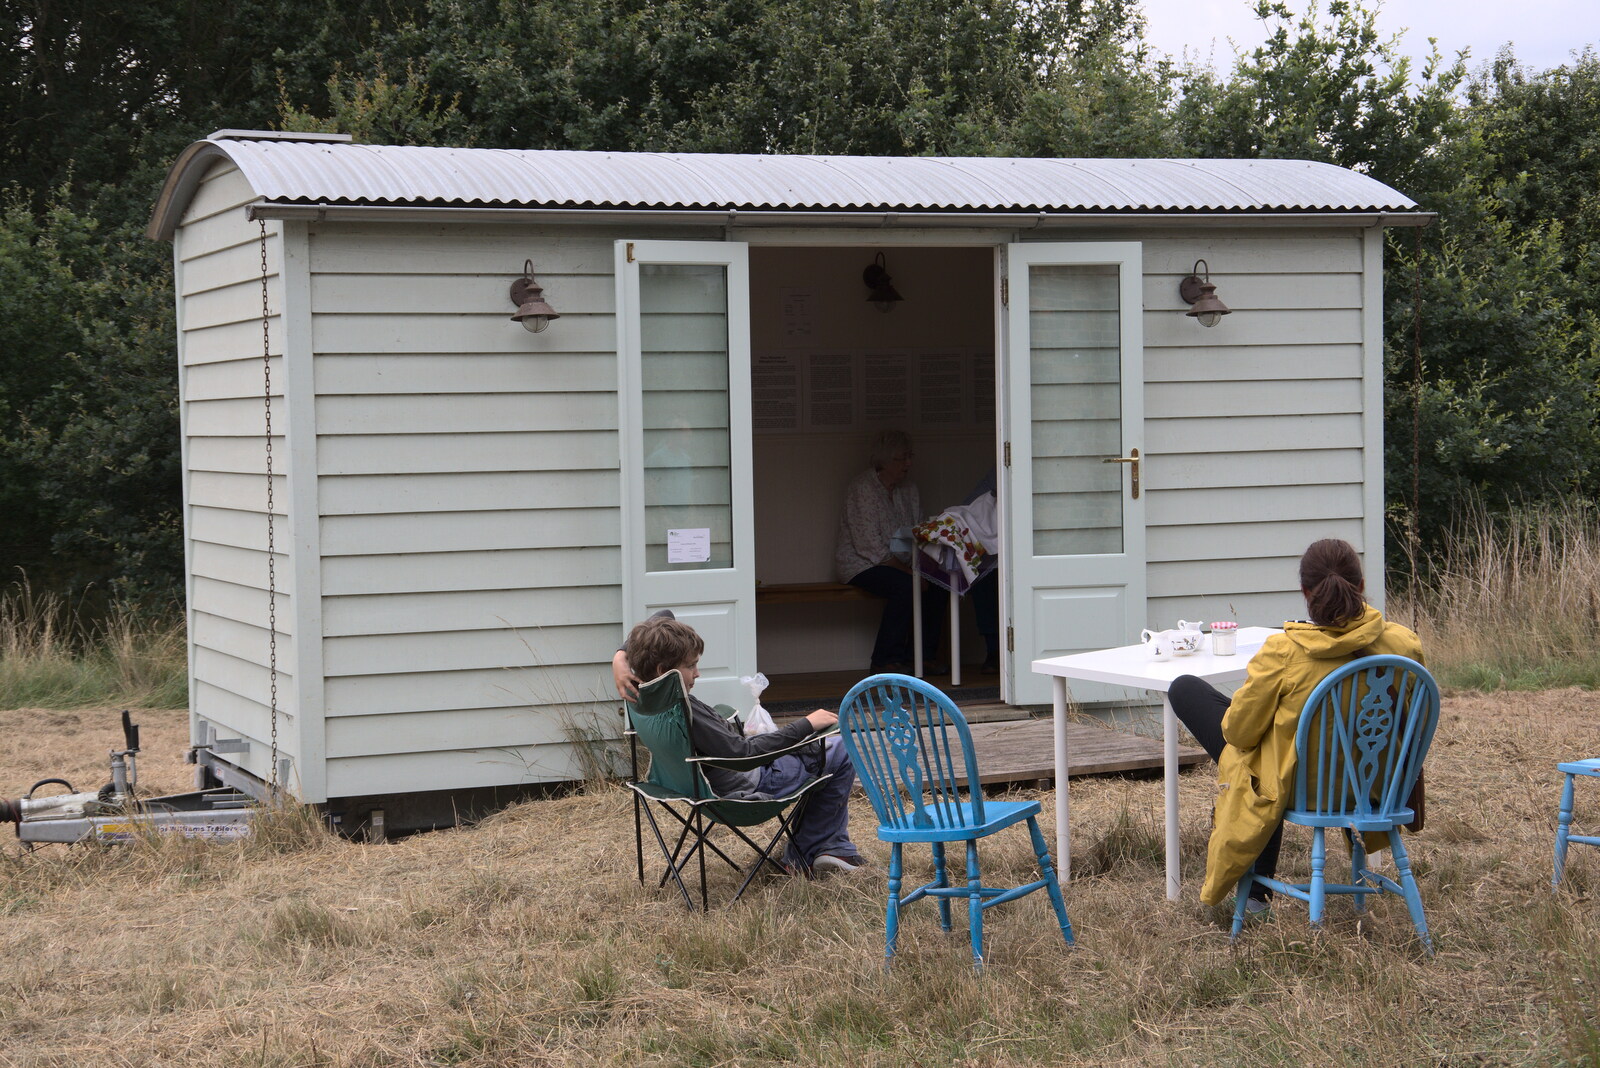 Isobel outside the shepherd hut from An Open Day at the Windmill, Billingford, Norfolk - 21st August 2021